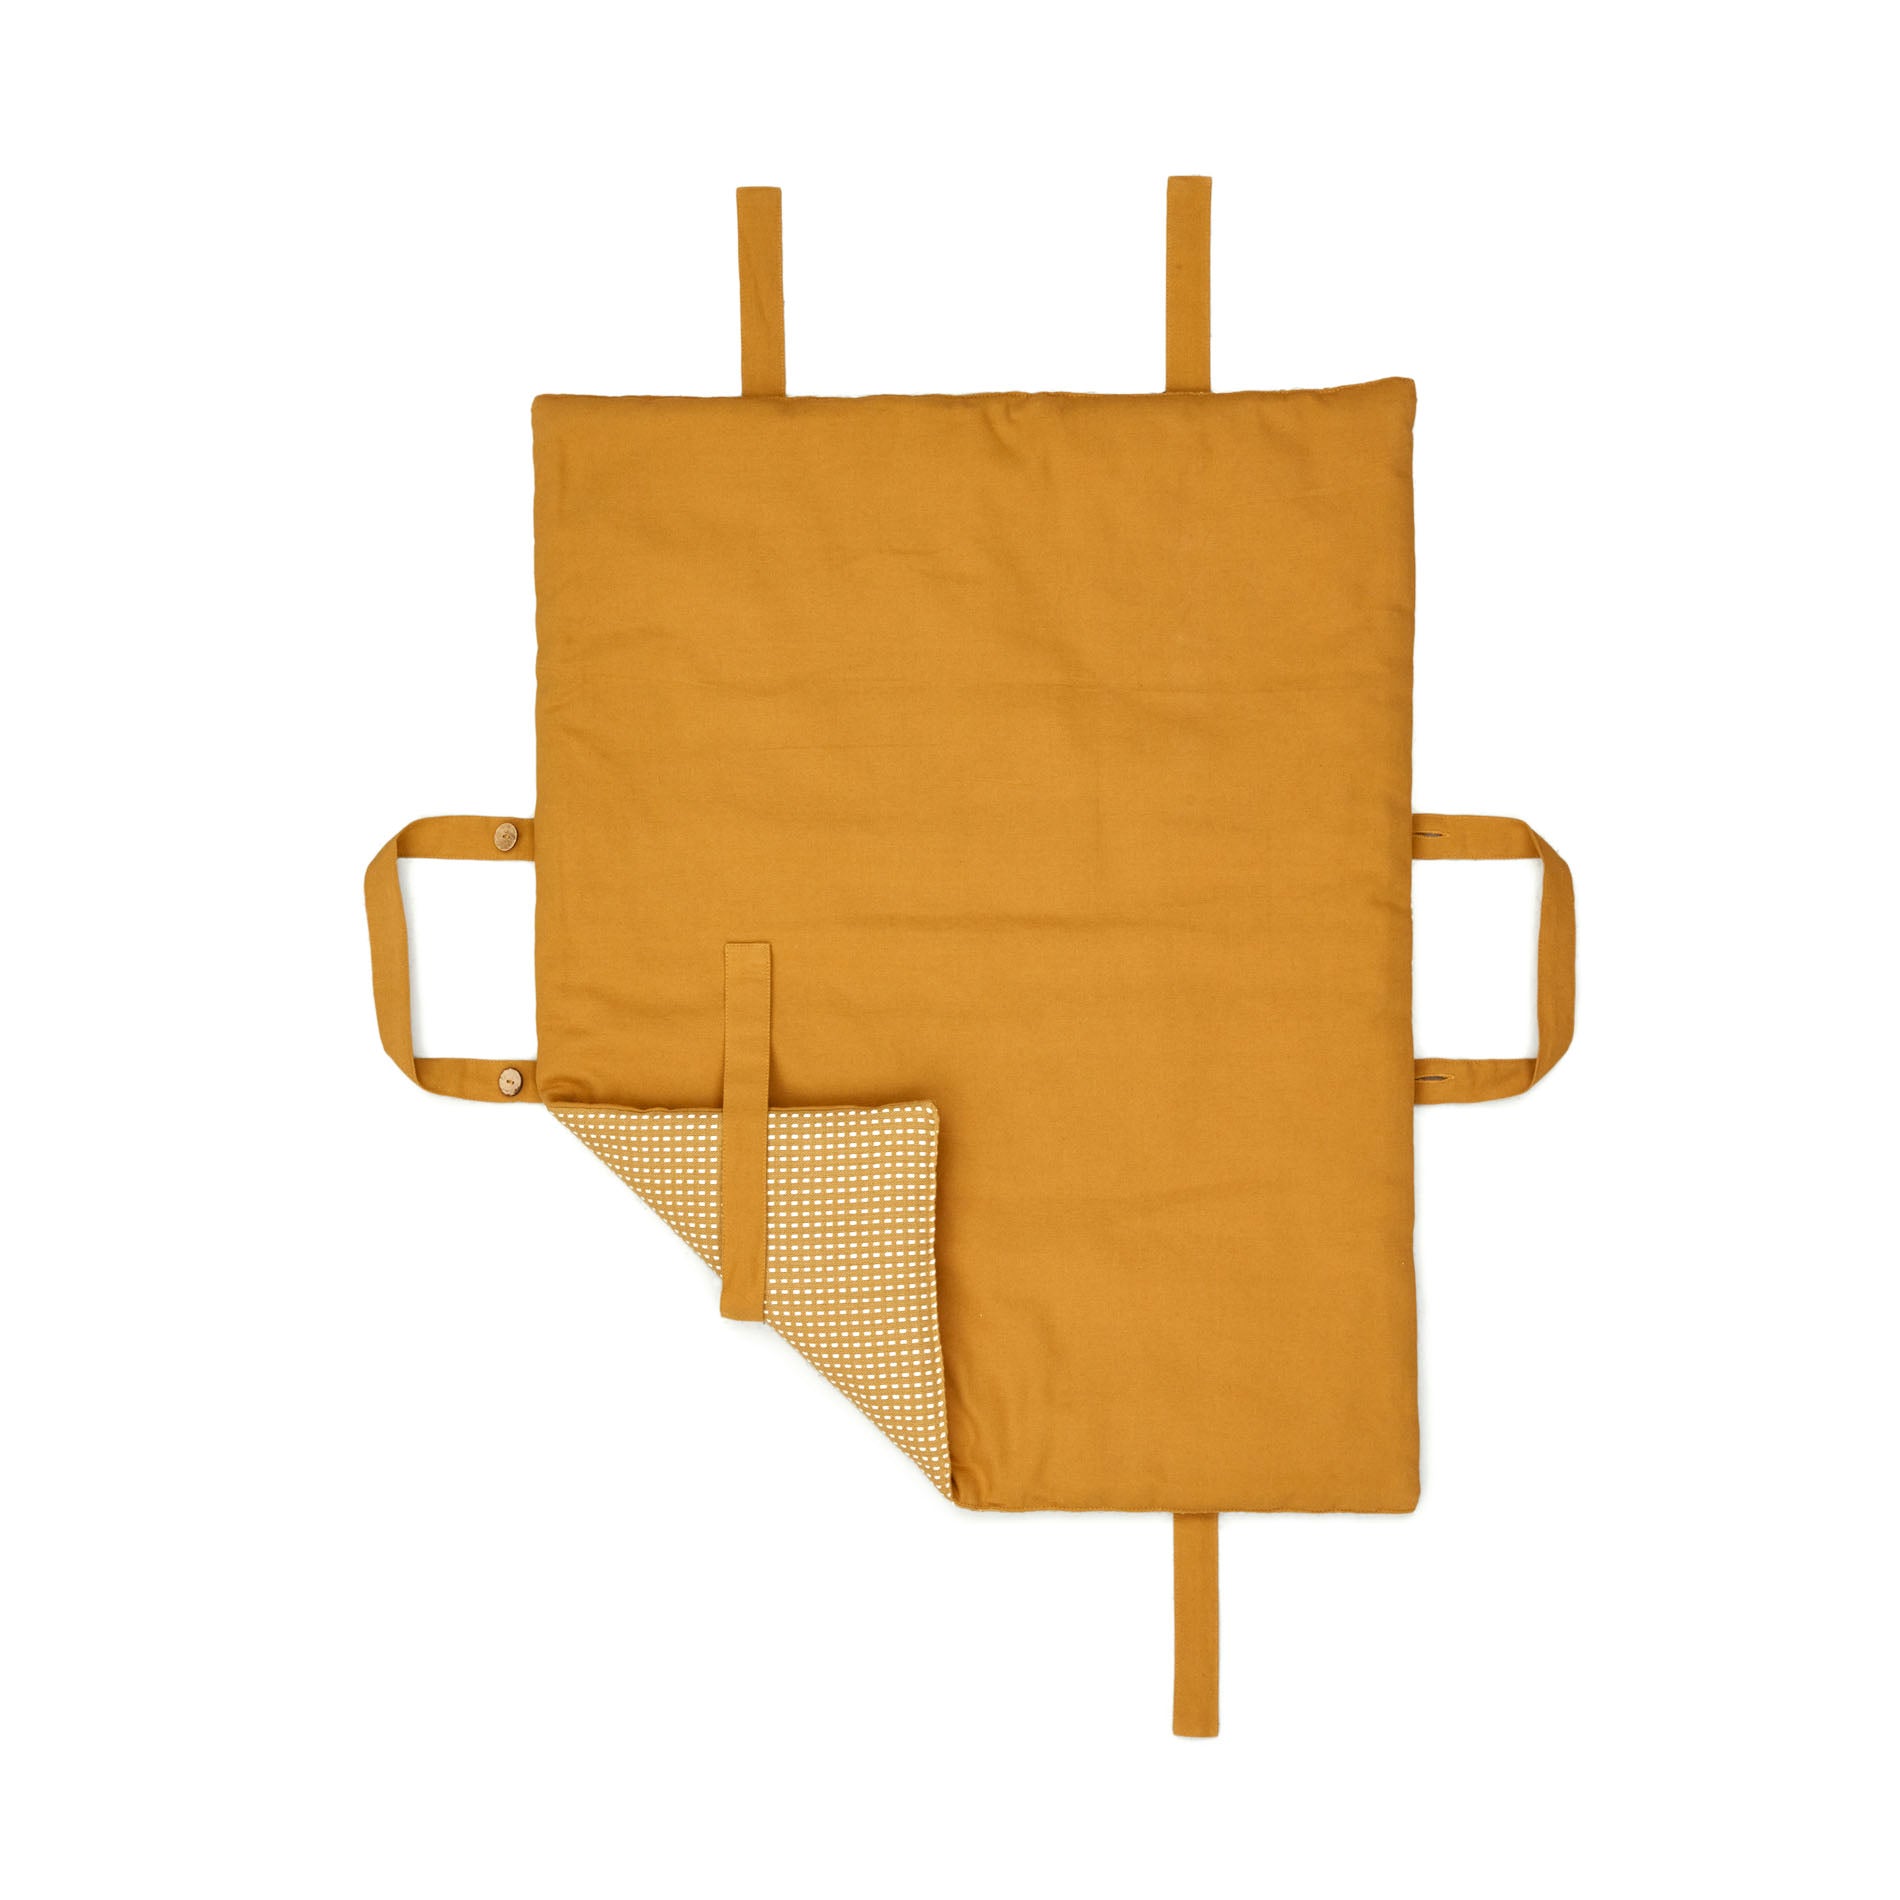 Trufa 100% cotton portable pet blanket with mustard and white backstitch, 60 x 80 cm